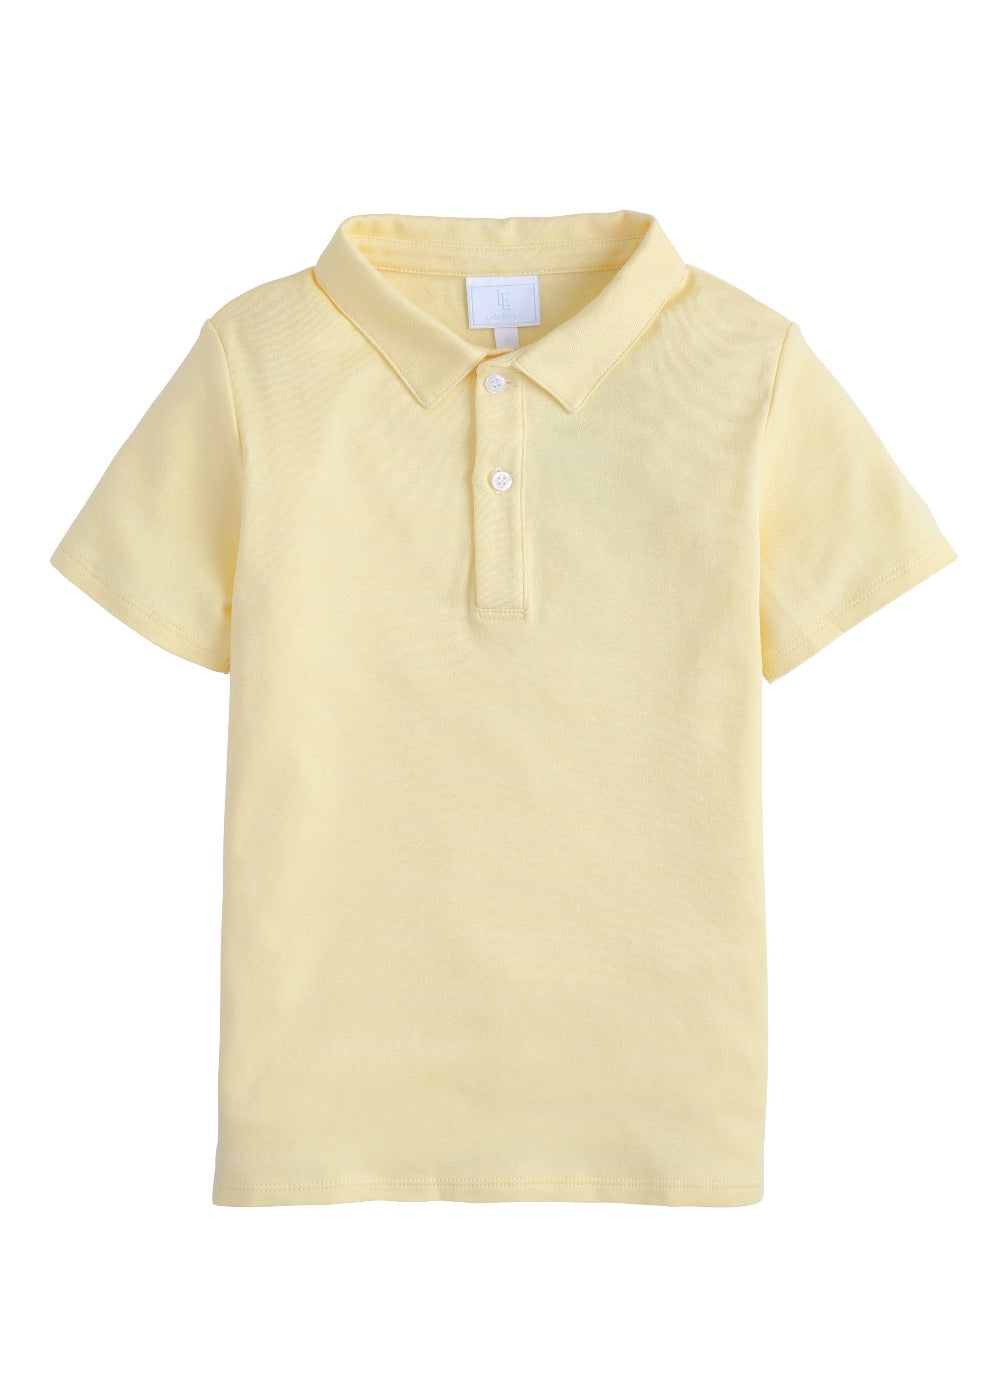 seguridadindustrialcr Classic Short Sleeve Solid Polo In Yellow Knit